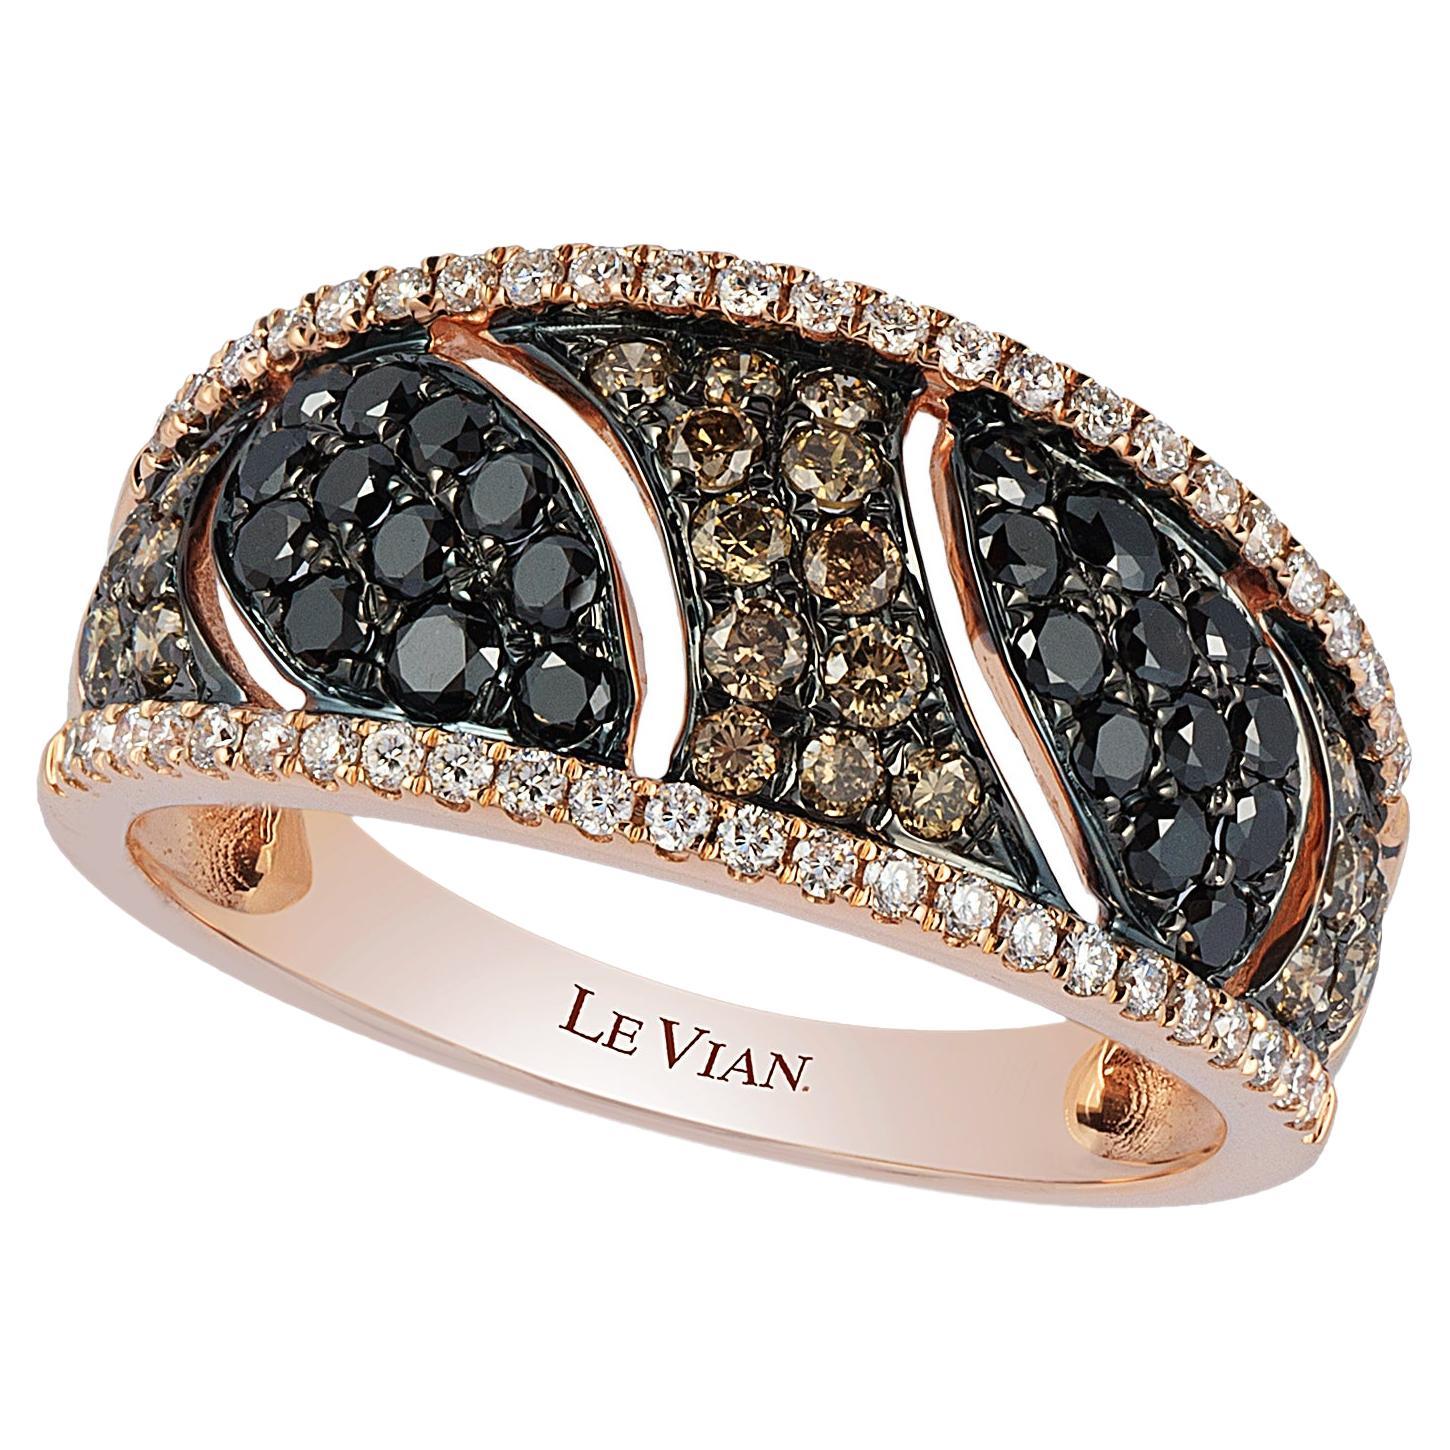 Levian Ring 7 8 Cts Black Chocolate and White Natural Diamonds in 14K Rose Gold For Sale